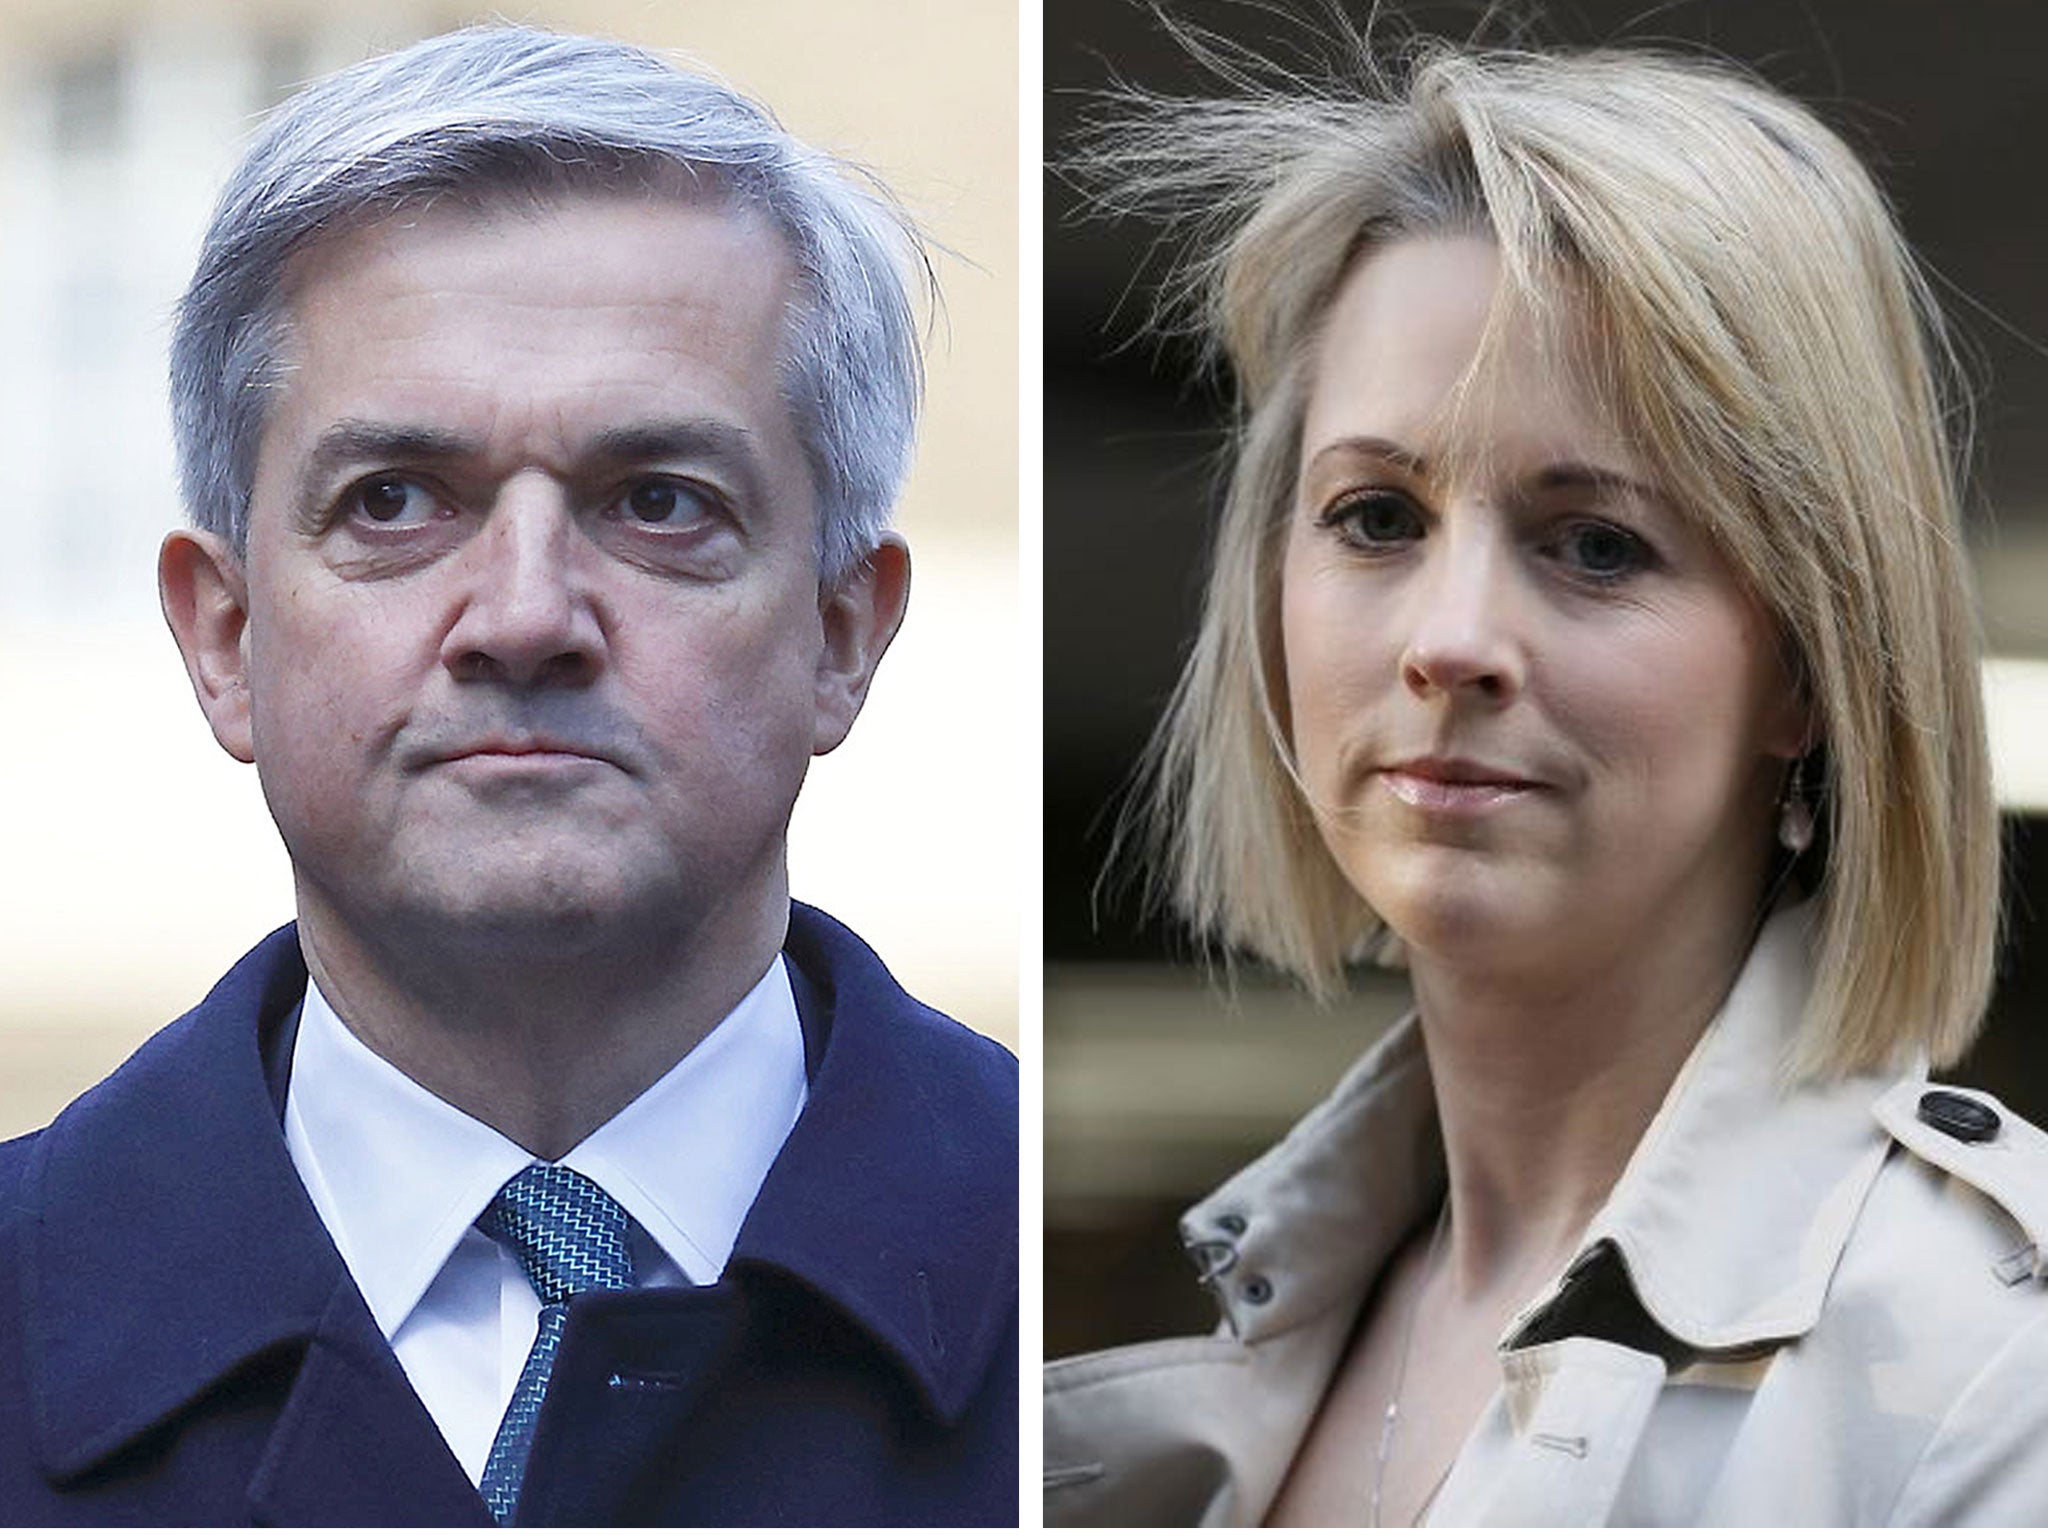 Disgraced former cabinet minister Chris Huhne (left), and The Sunday Times political editor, Isabel Oakeshott